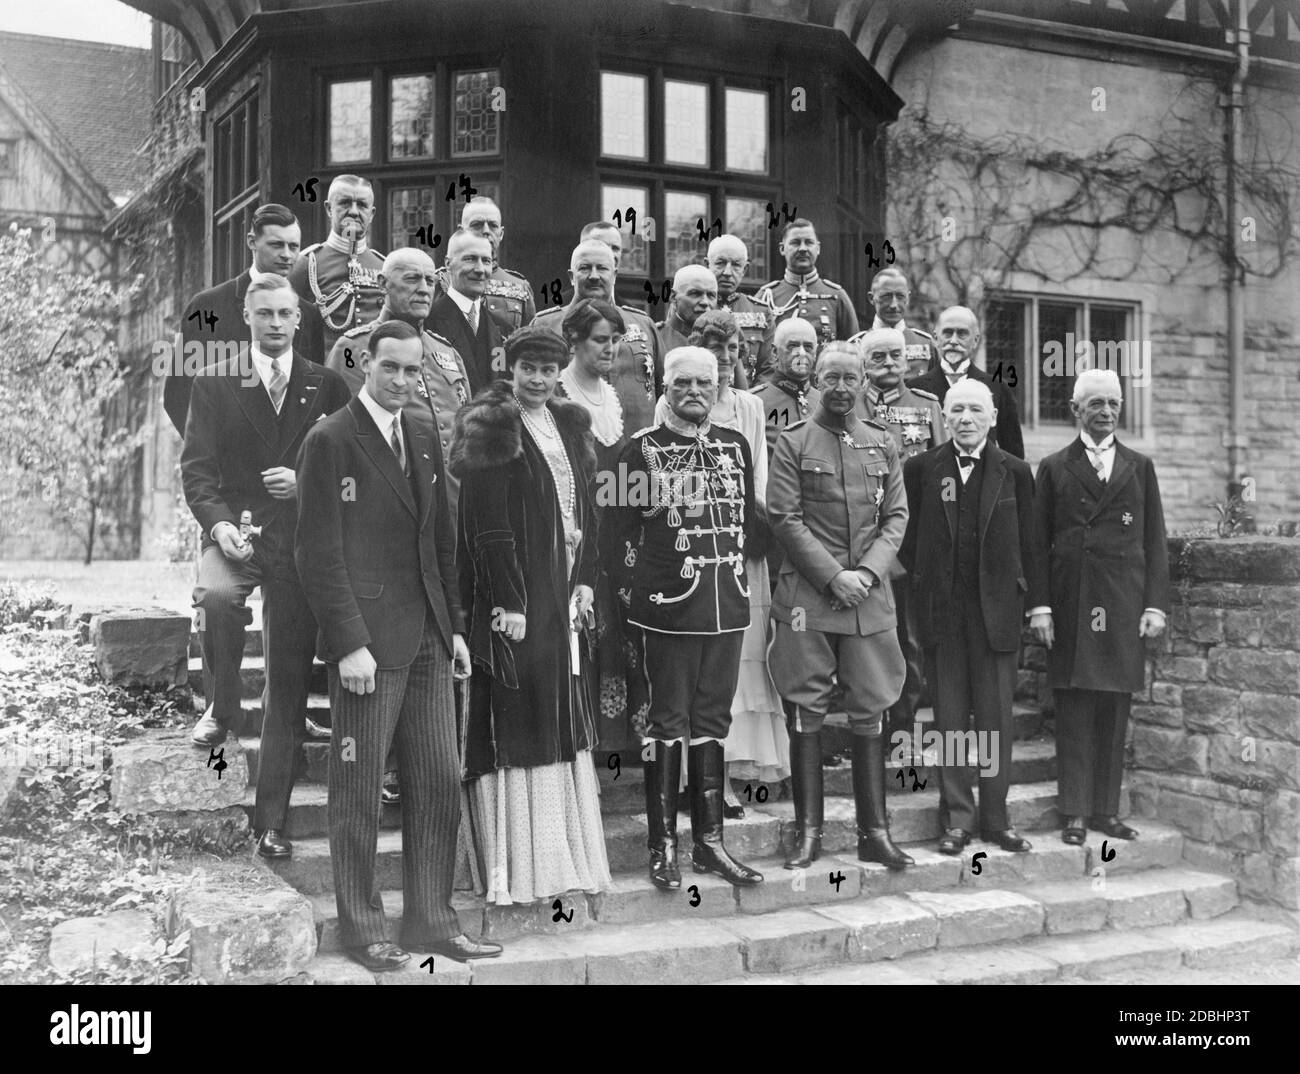 Meeting of the relatives of Crown Prince Wilhelm of Prussia and retired officers and generals from the time of the Empire at Cecilienhof Palace in Potsdam on May 6, 1932, on Wilhelm's 50th birthday. First row from left to right (No. 1-6): Prince Hubertus of Prussia, Crown Princess Cecilie of Mecklenburg, Field Marshal August von Mackensen (in the uniform of the 1. Leib-Husaren-Regiments Nr. 1), Crown Prince Wilhelm of Prussia, Colonel General von Einem and General of the Infantry Freiherr Walther von Luettwitz (both in civilian clothes). Second row from left to right (No. 7-13): Prince Stock Photo